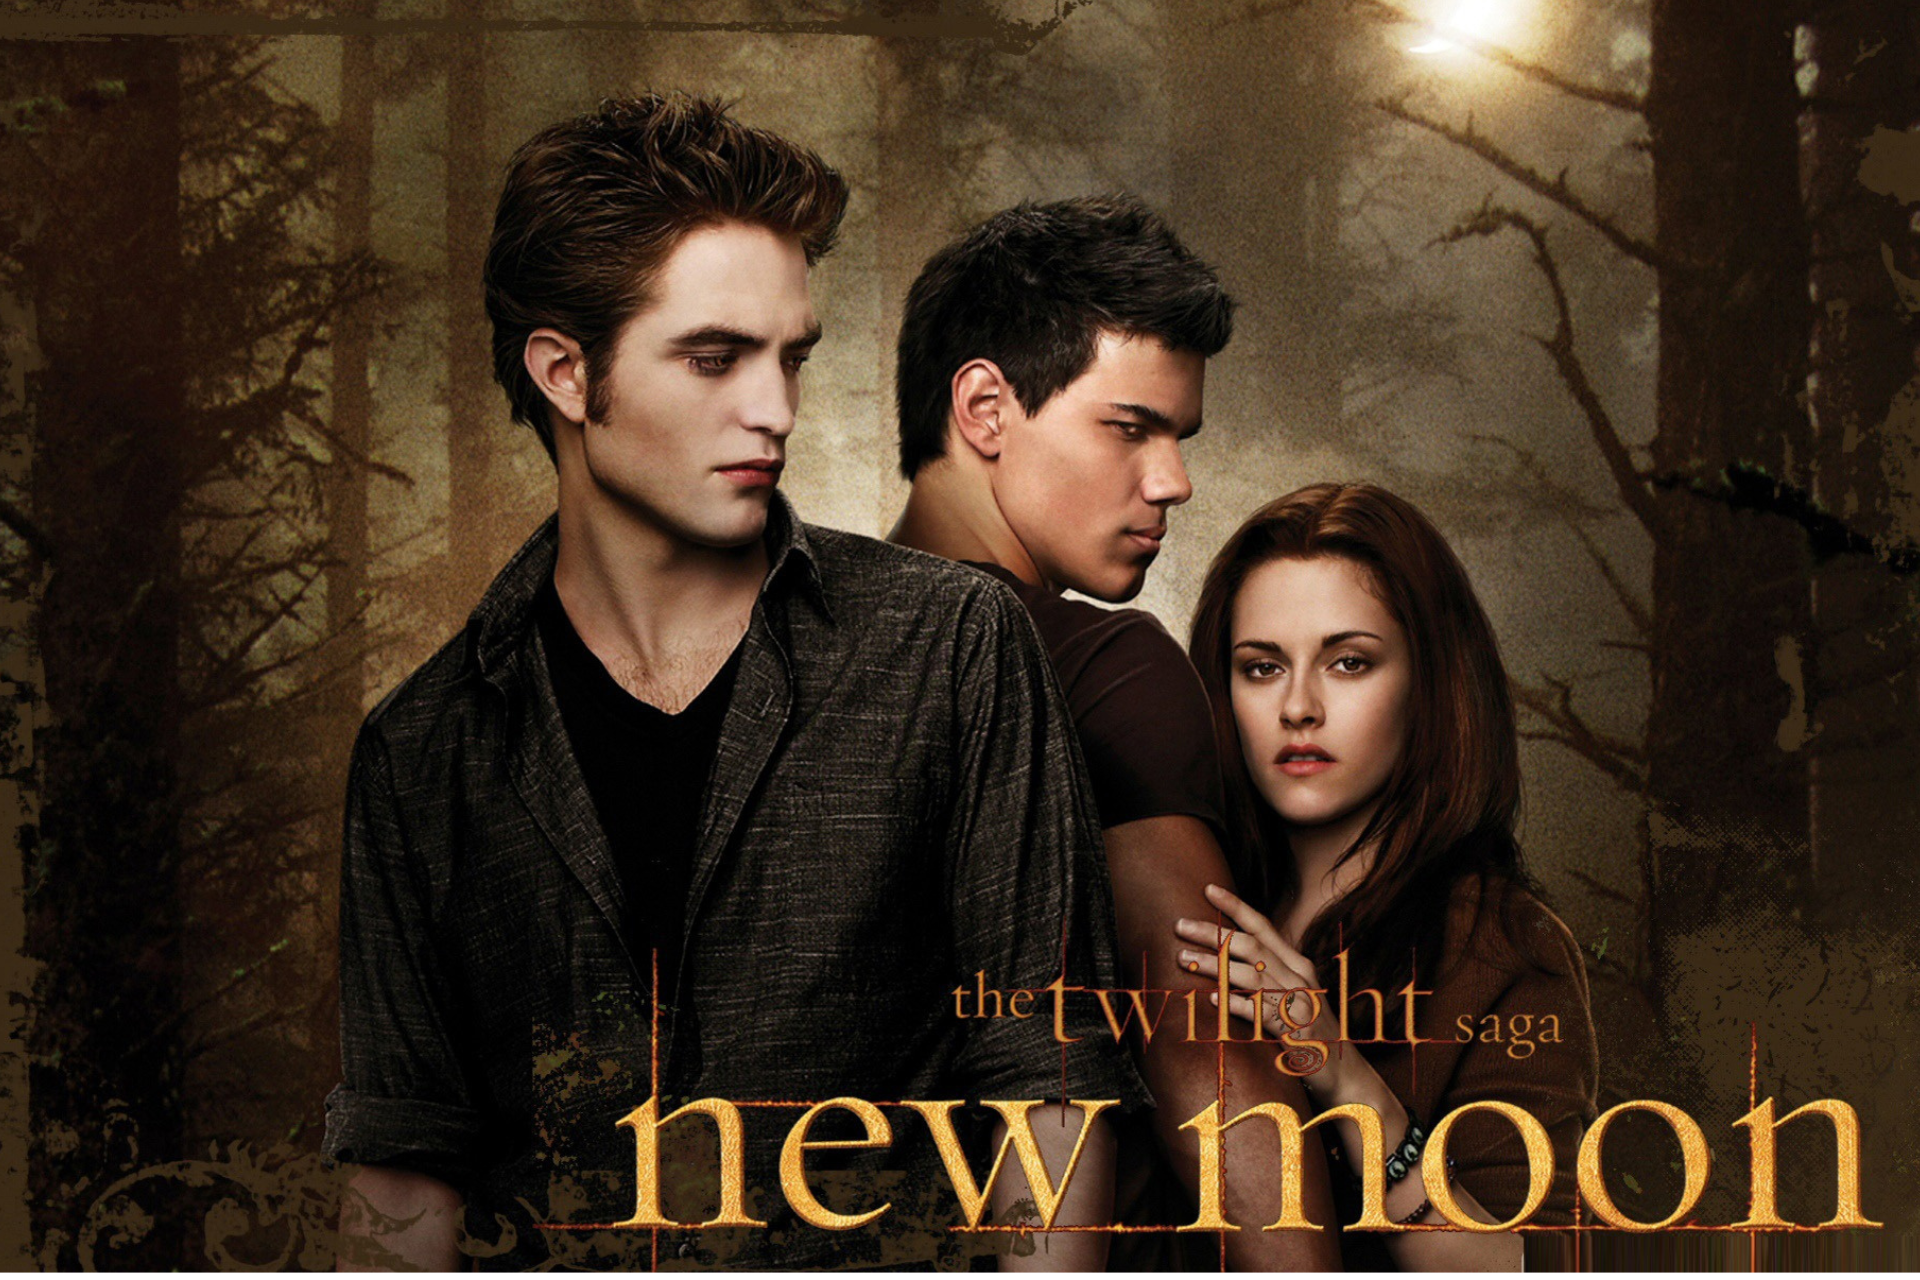 Where to watch Twilight: New Moon